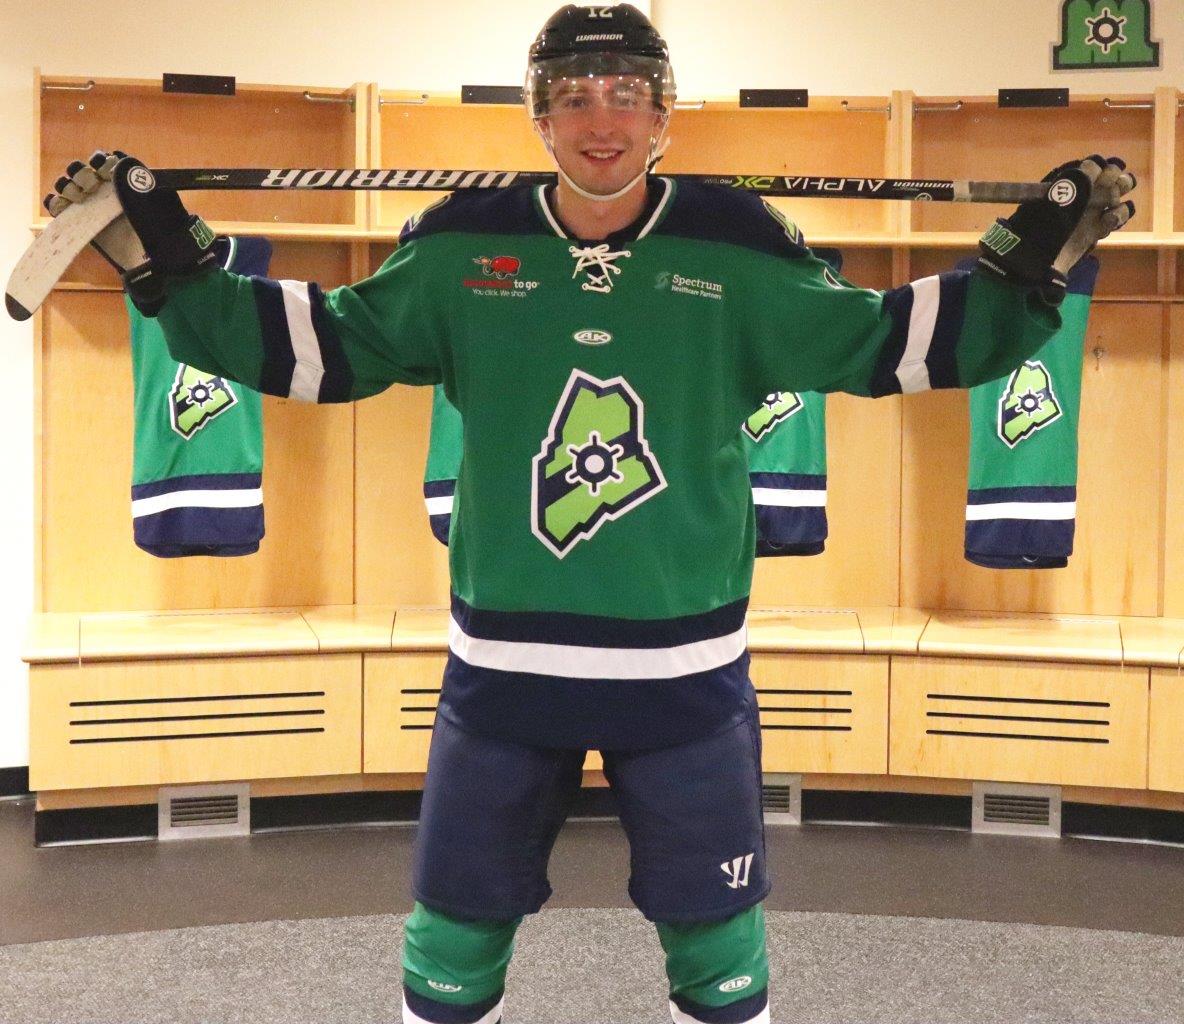 MARINERS REVEAL NEW THIRD JERSEY